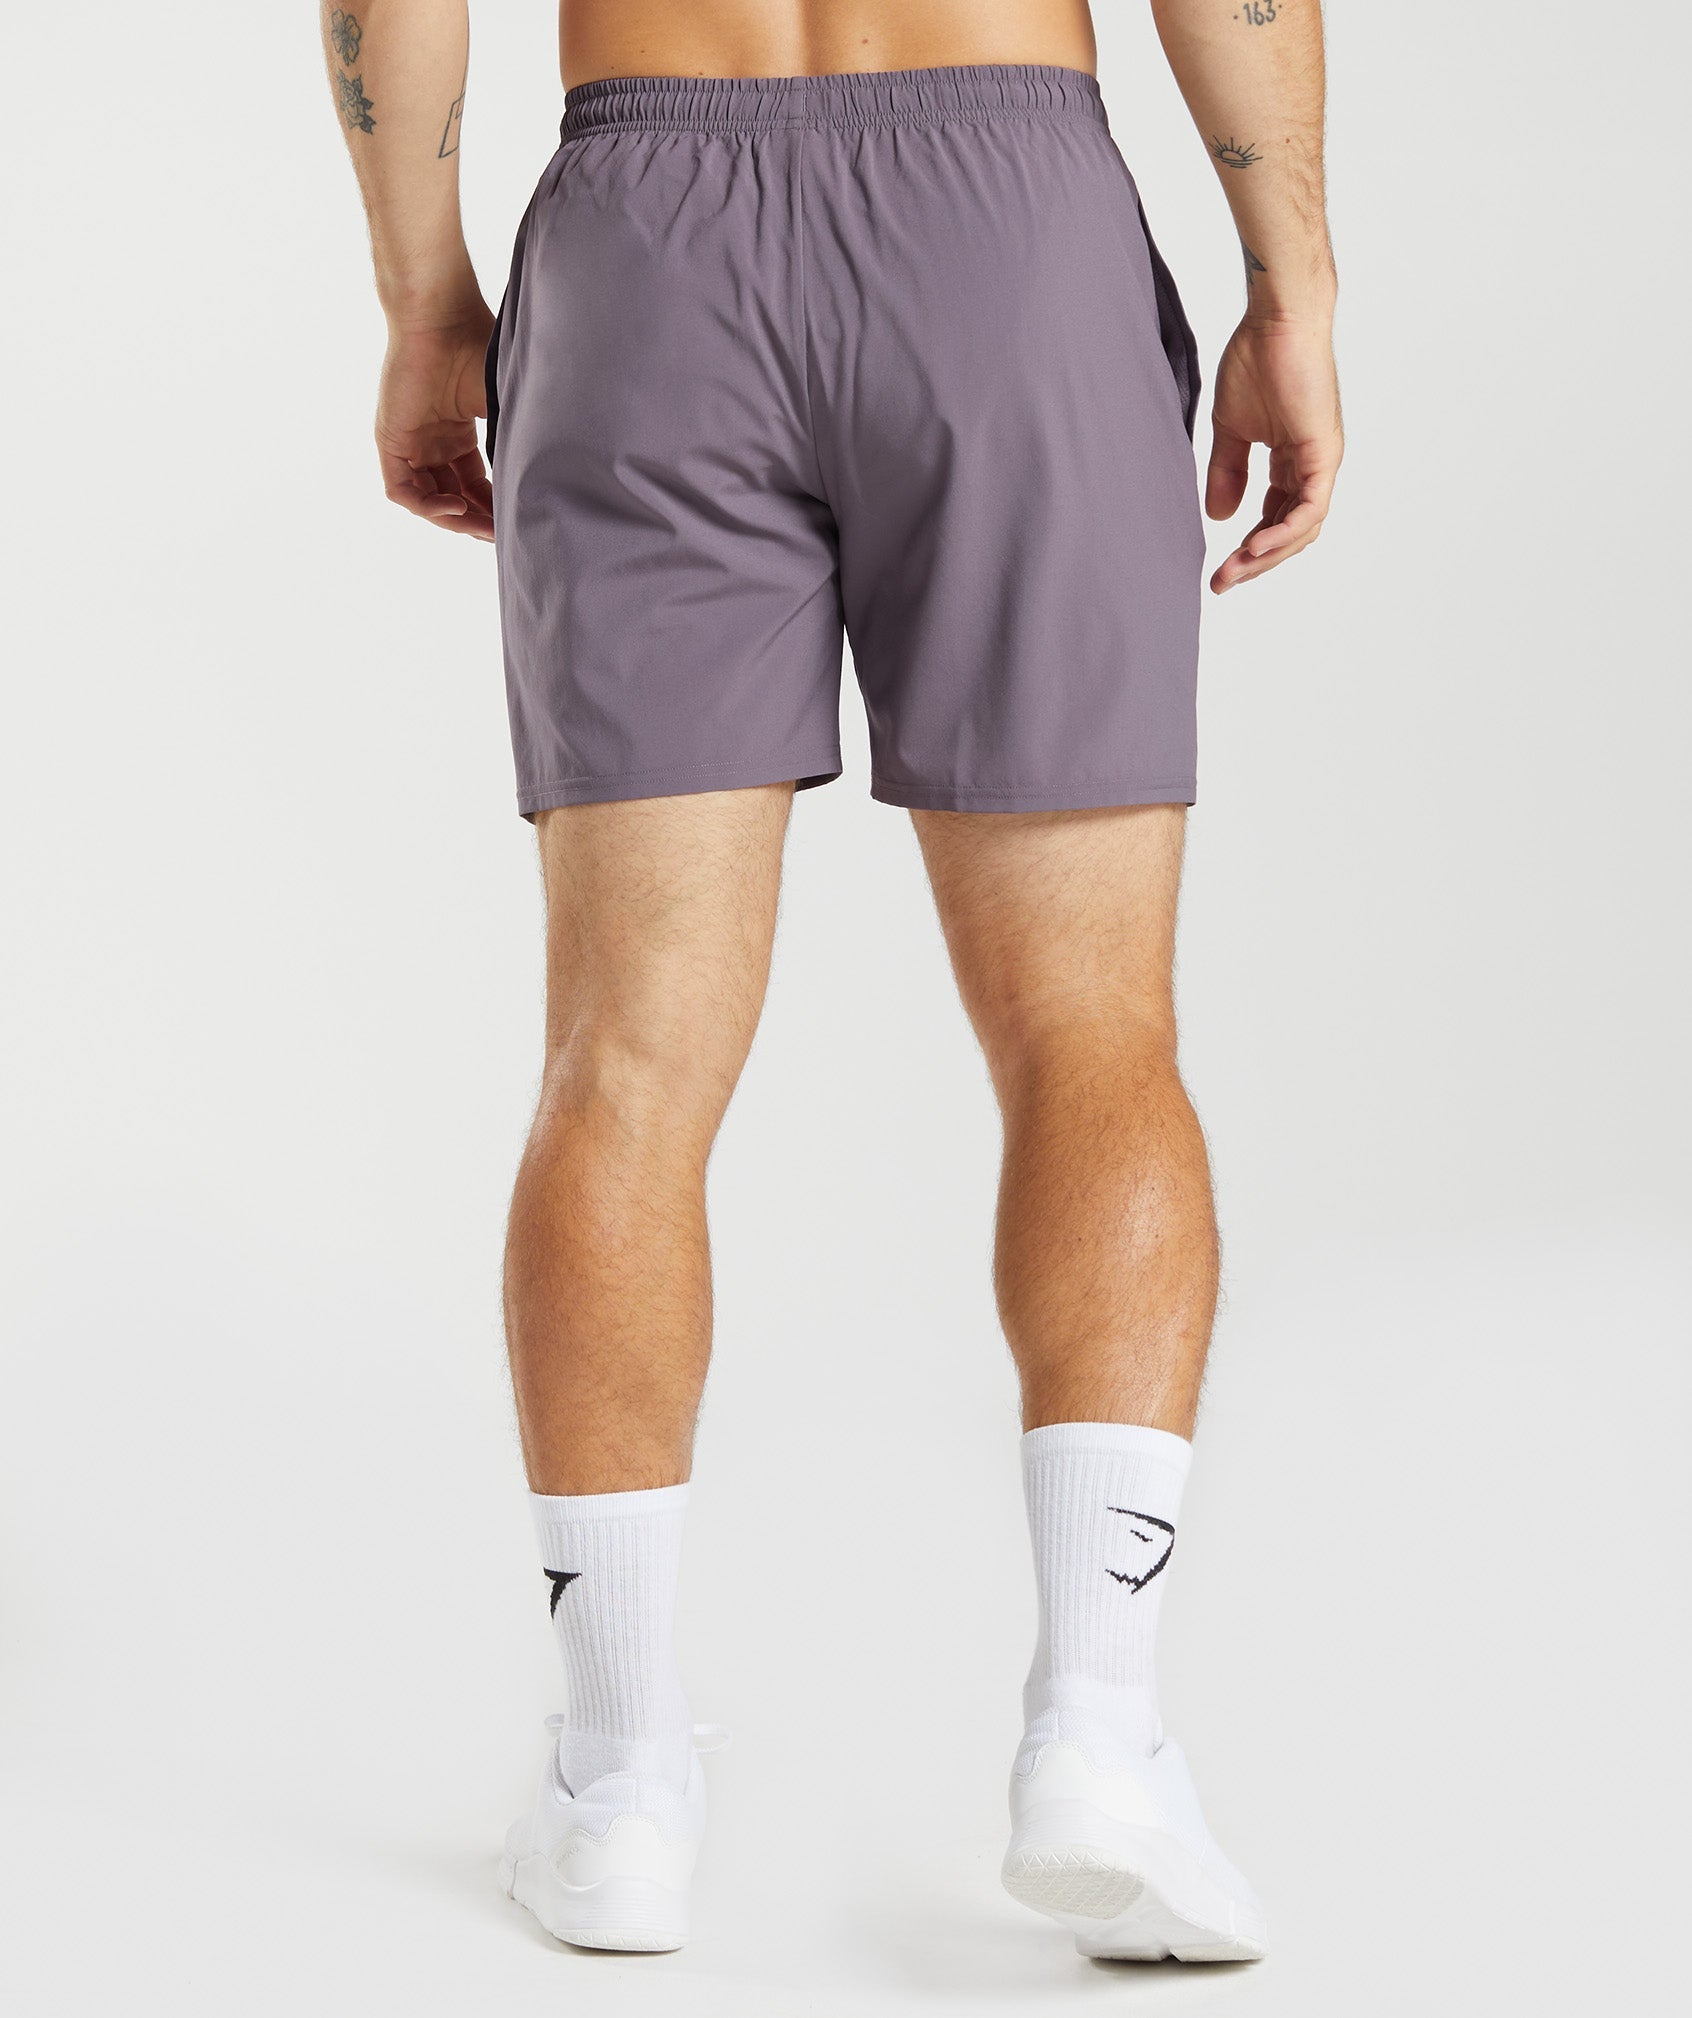 Arrival 7" Shorts in Musk Lilac - view 2